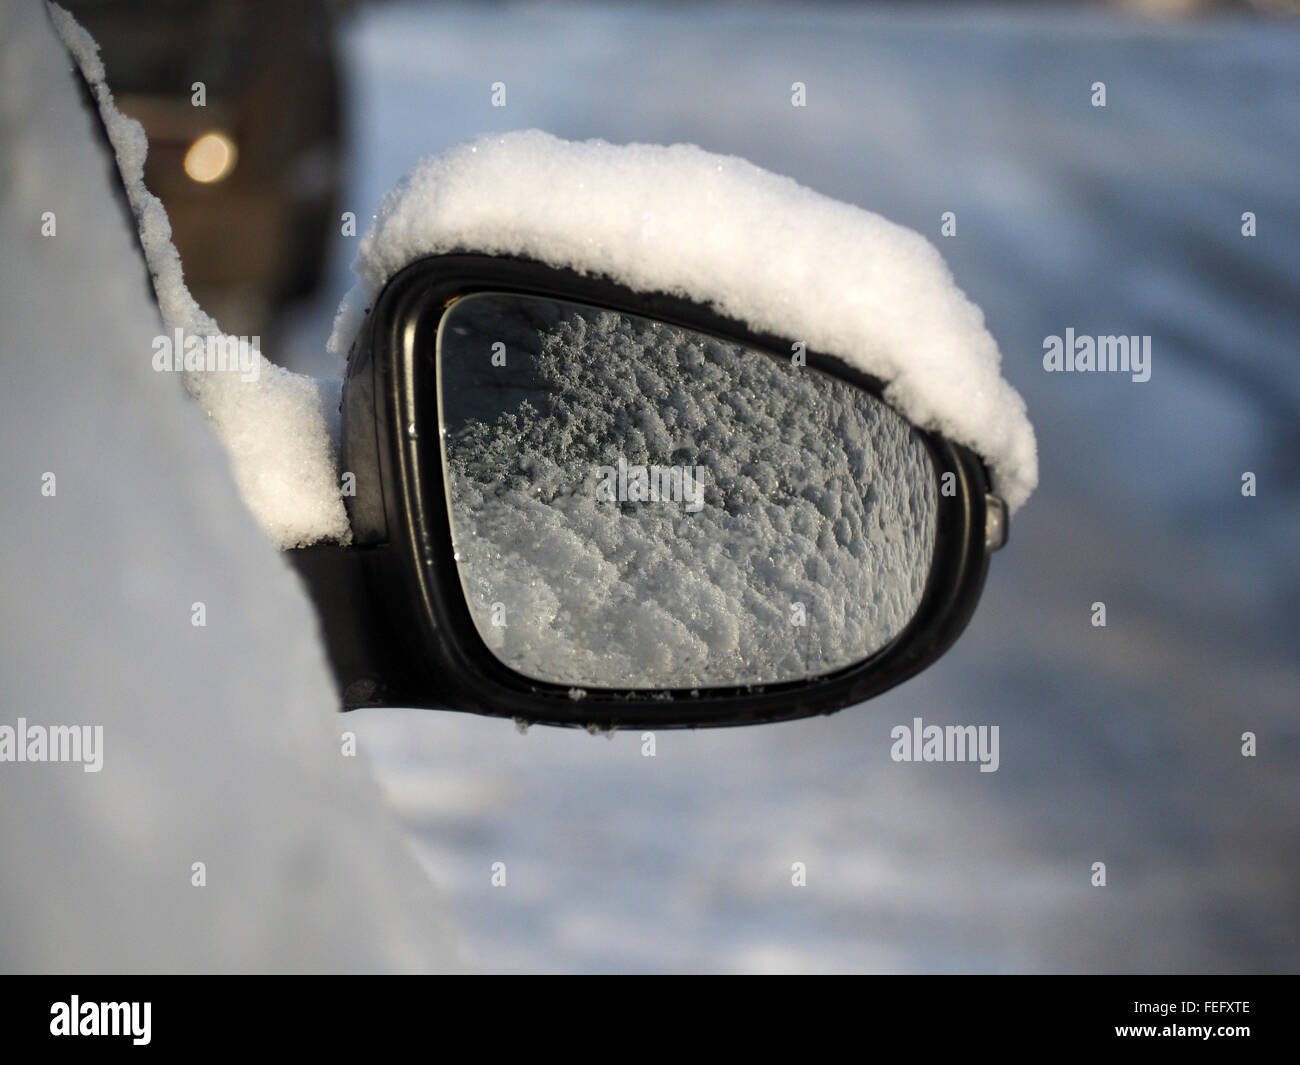 Car wing mirror with a covering of snow in winter on a slippery northern rural road Stock Photo